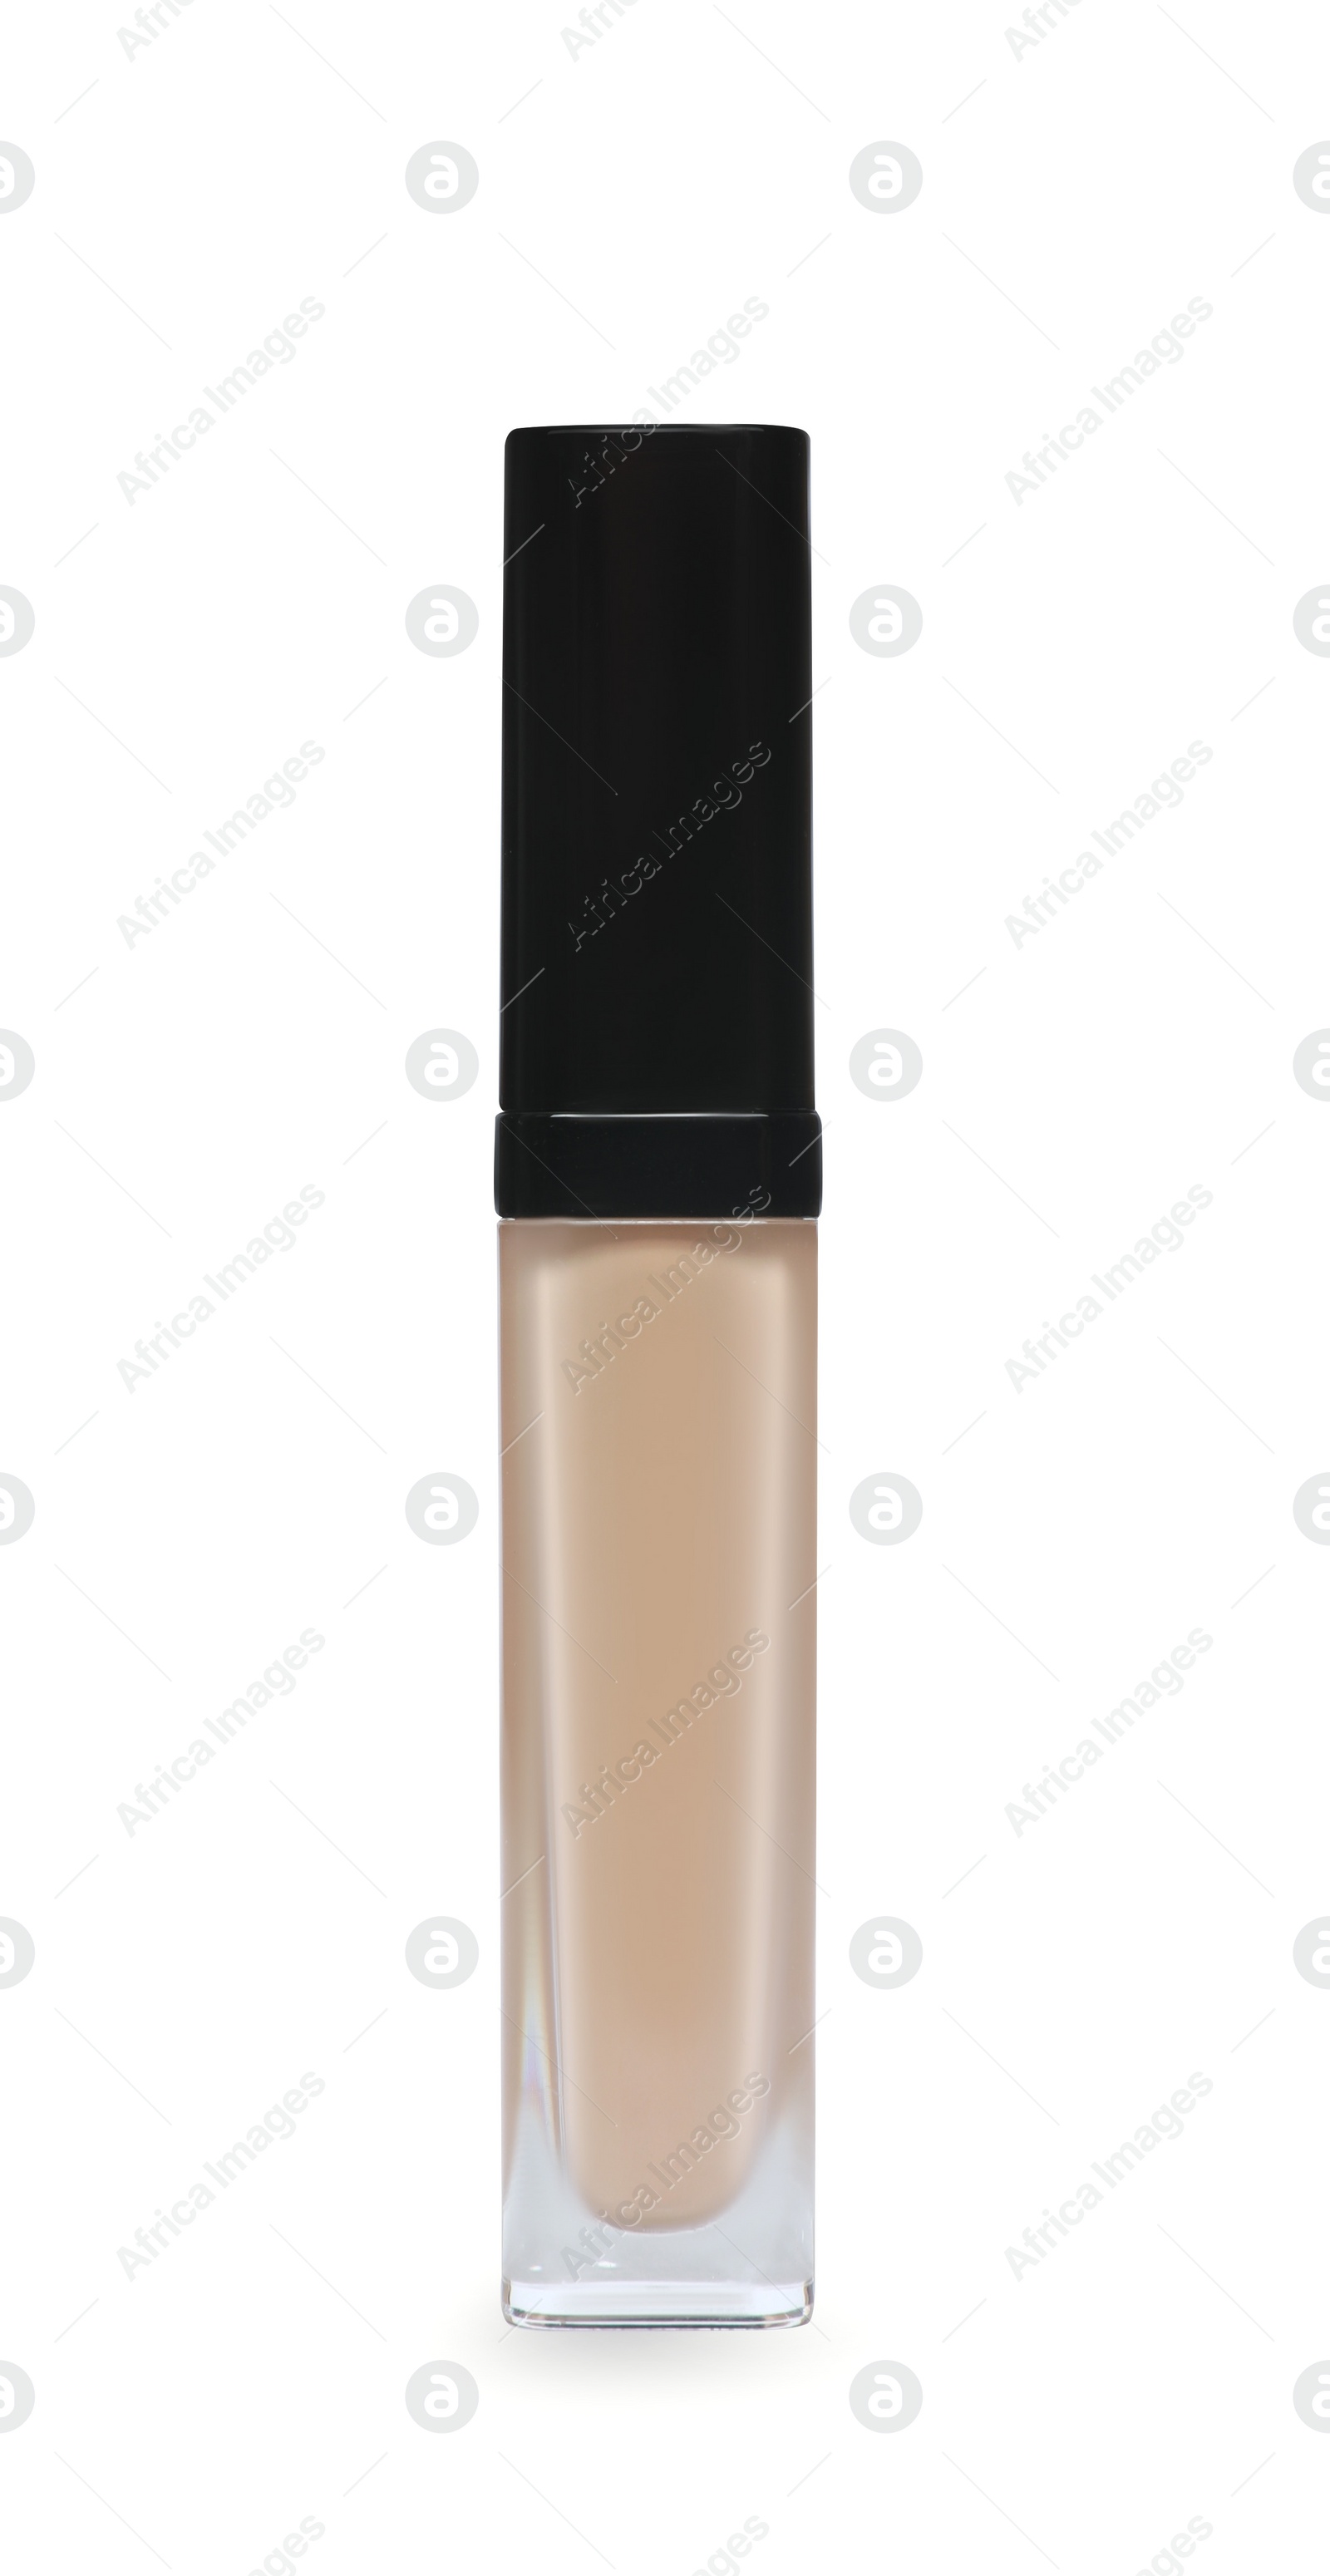 Photo of One tube of skin concealer isolated on white